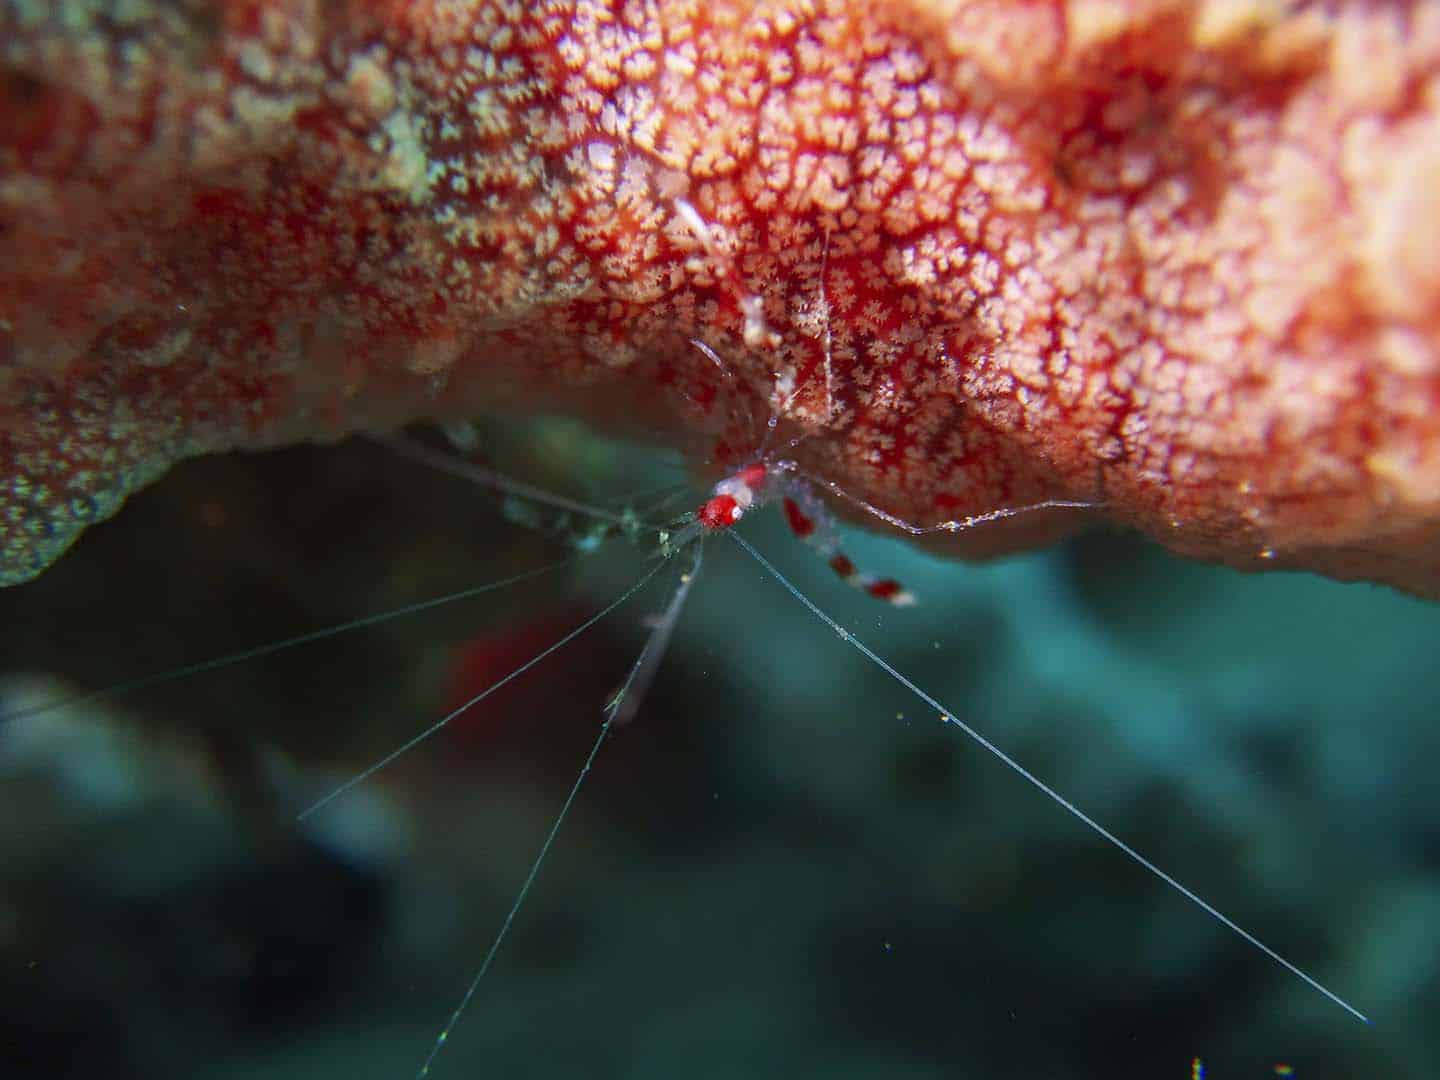 A baby Coral banded Shrimp